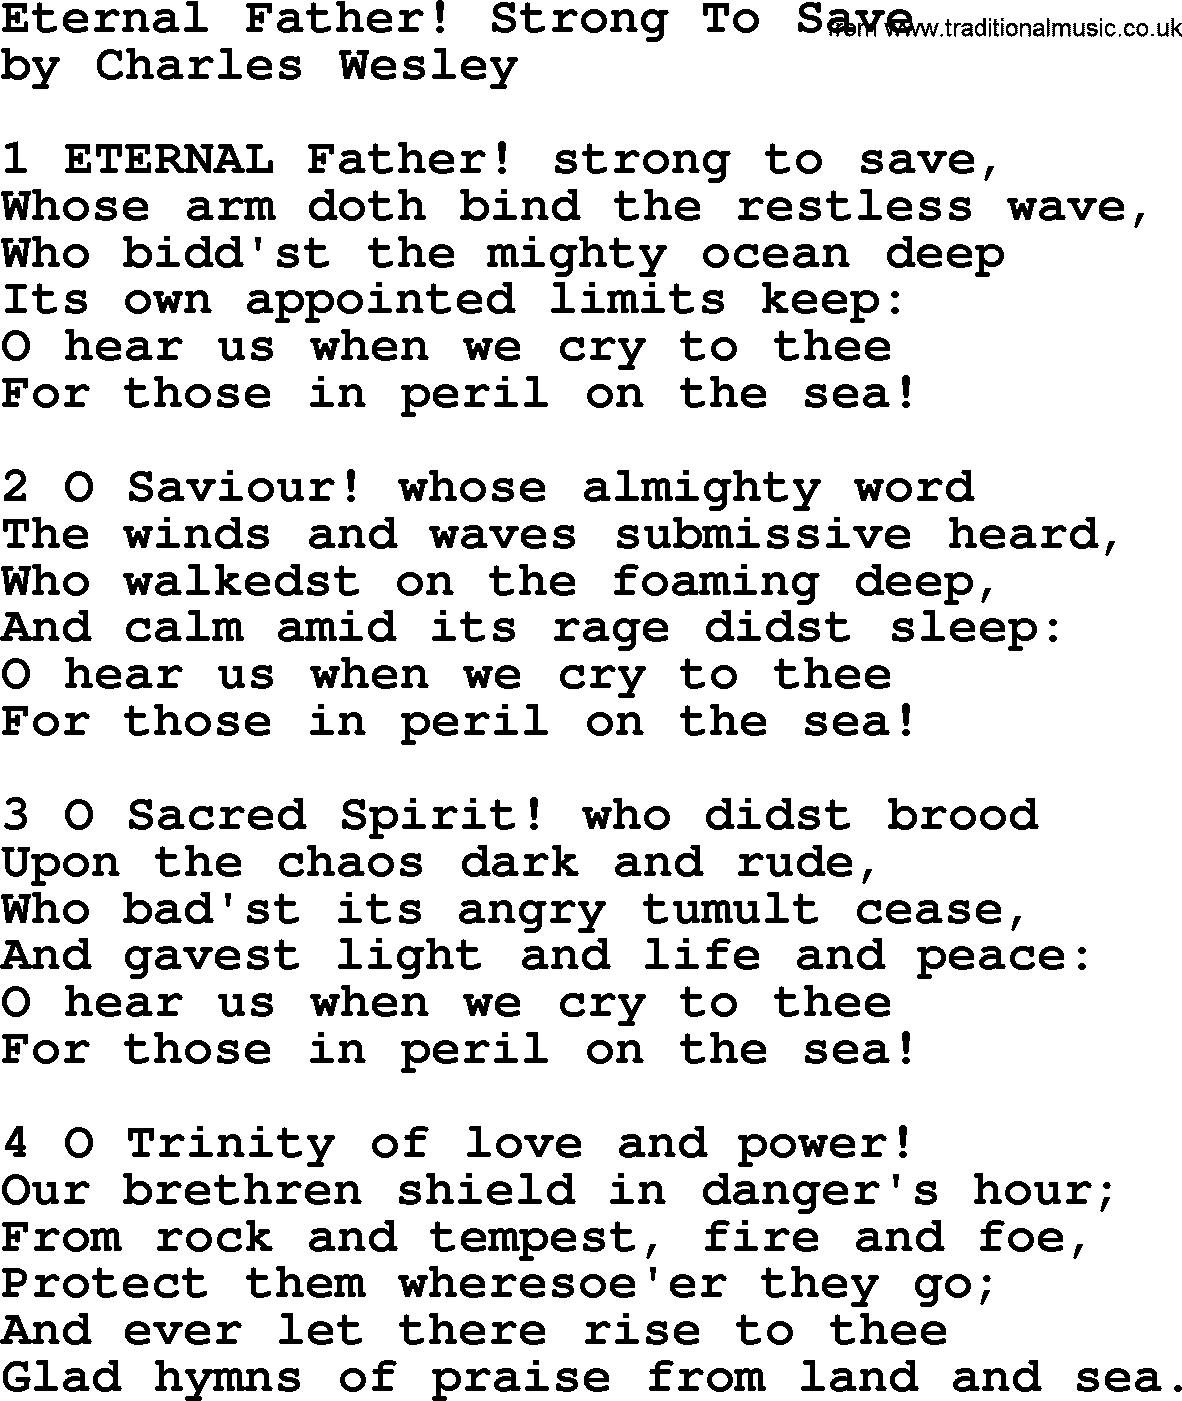 Charles Wesley hymn: Eternal Father! Strong To Save, lyrics